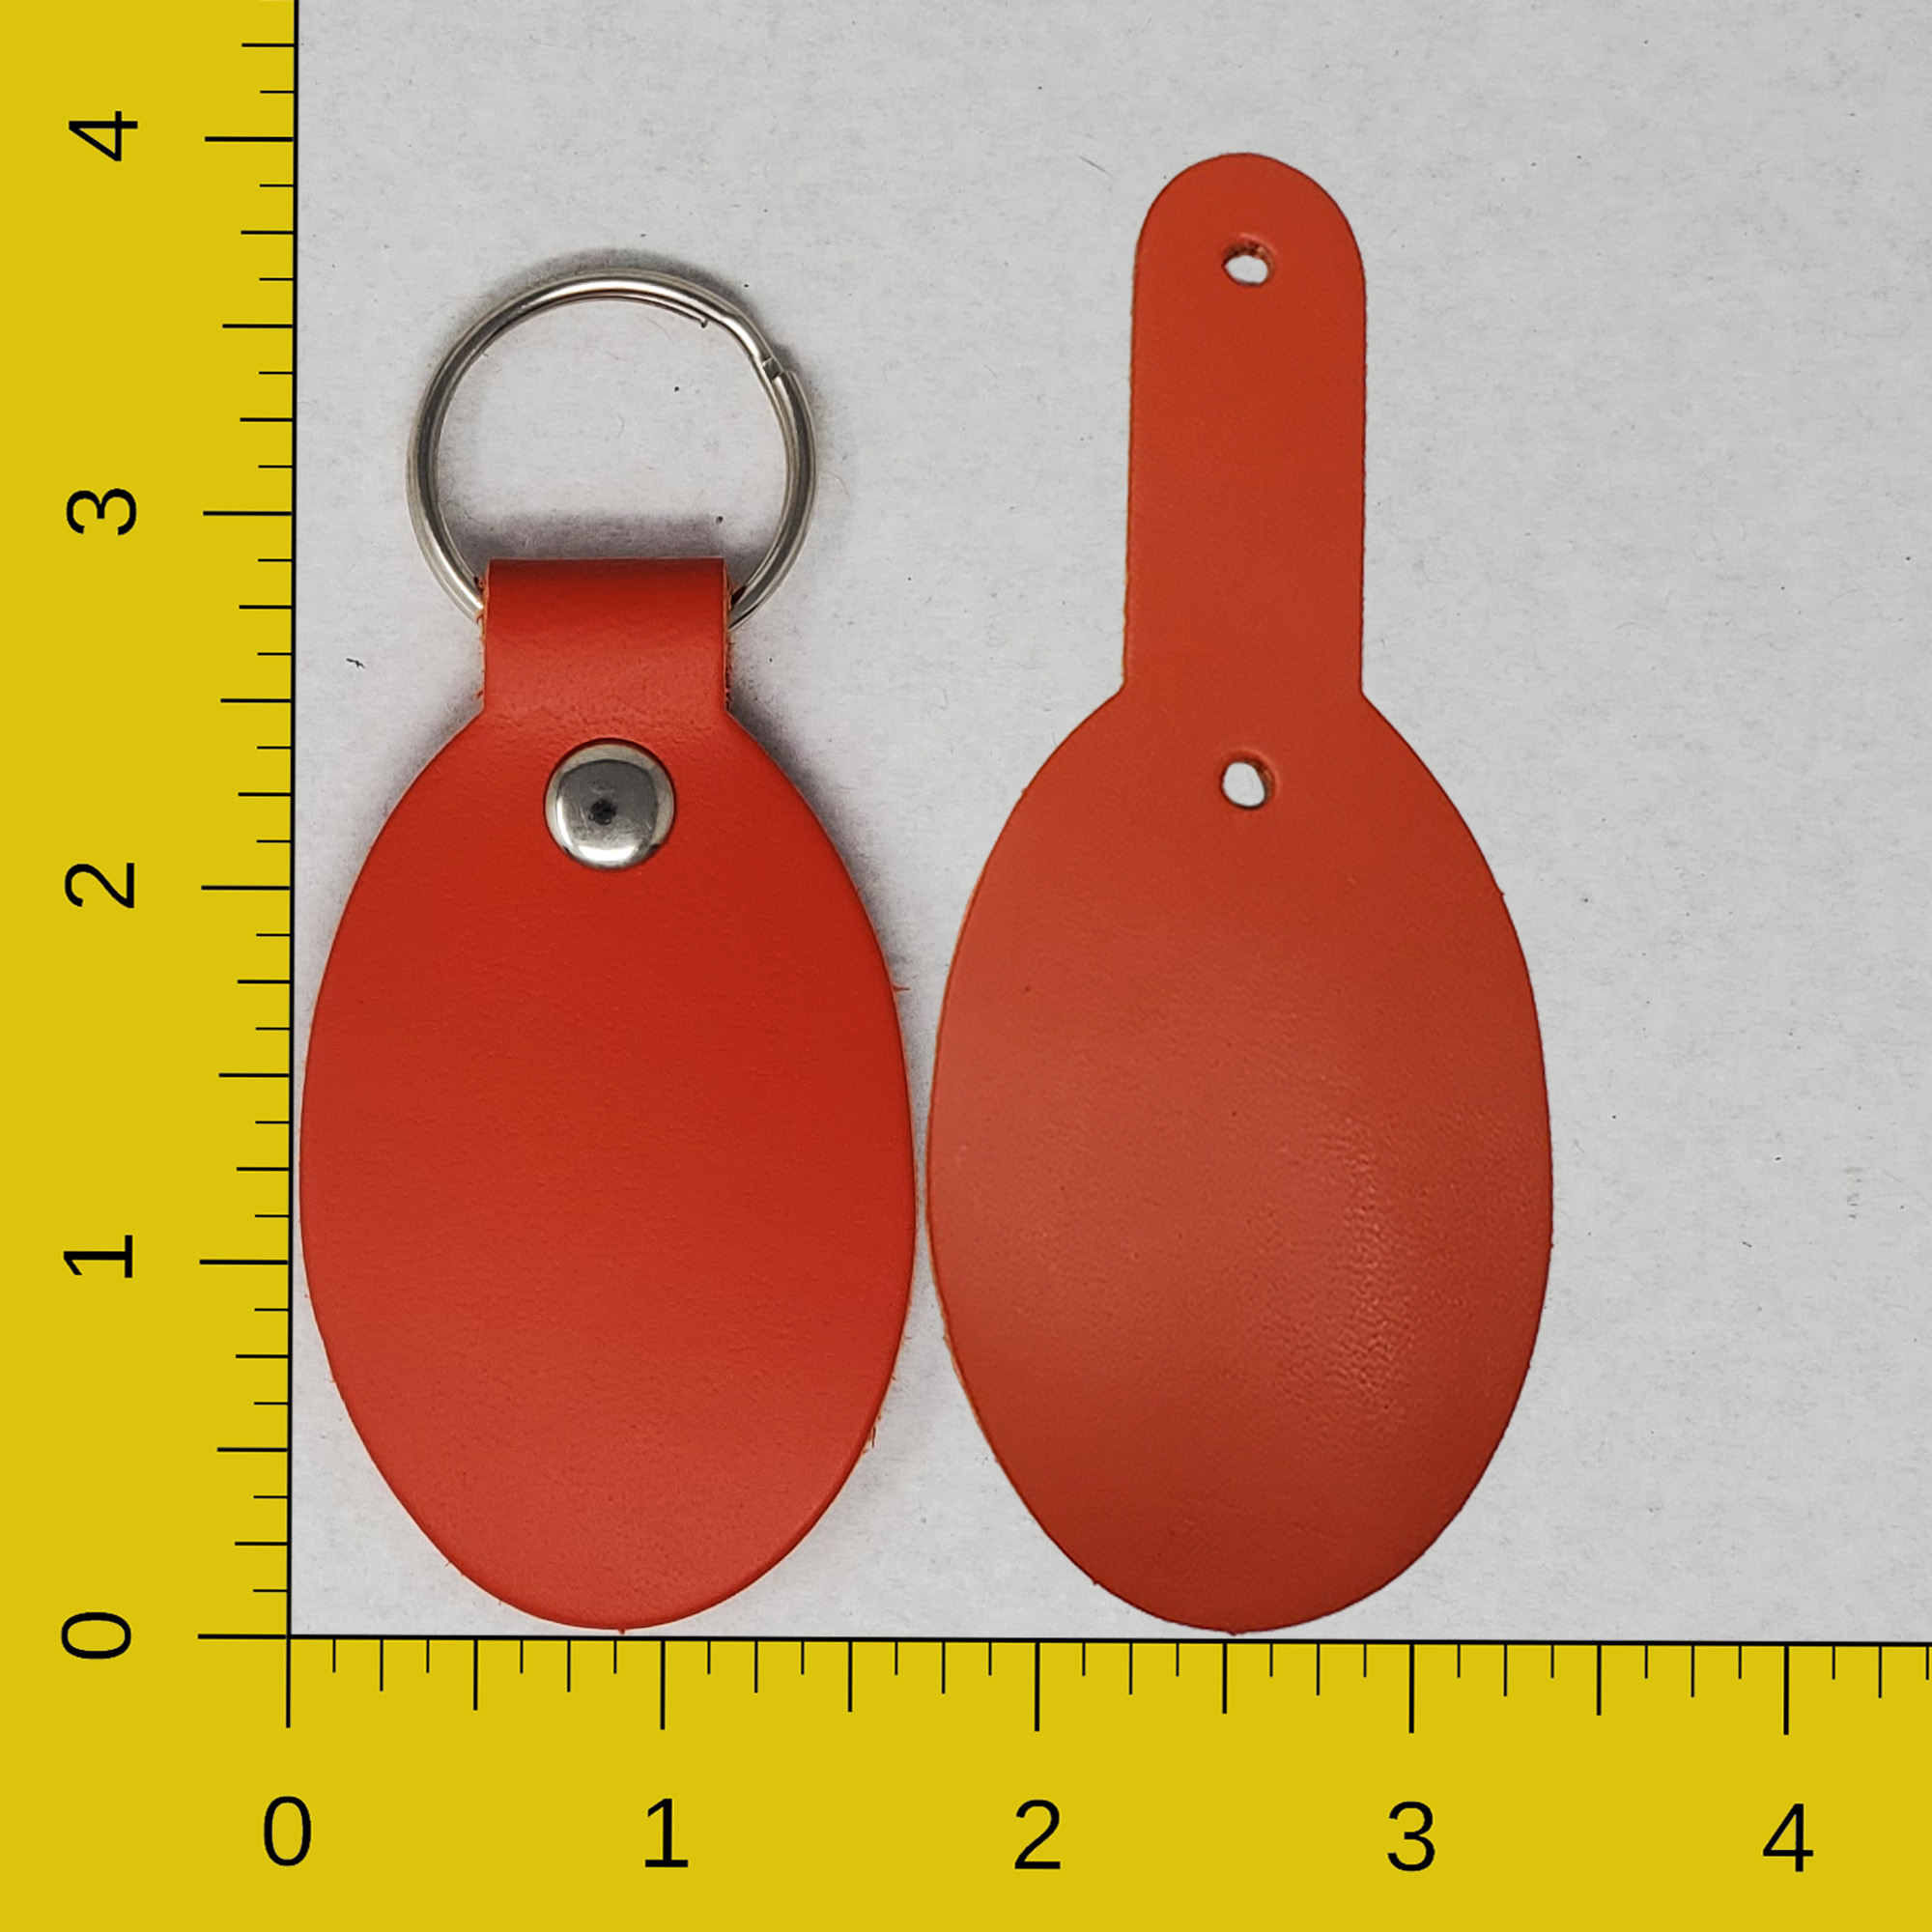 Leather Keychains Blanks 10 Pack-DIY Unique Oval Shaped One Pieced Leather  Key Fobs Blanks-Hardware Included